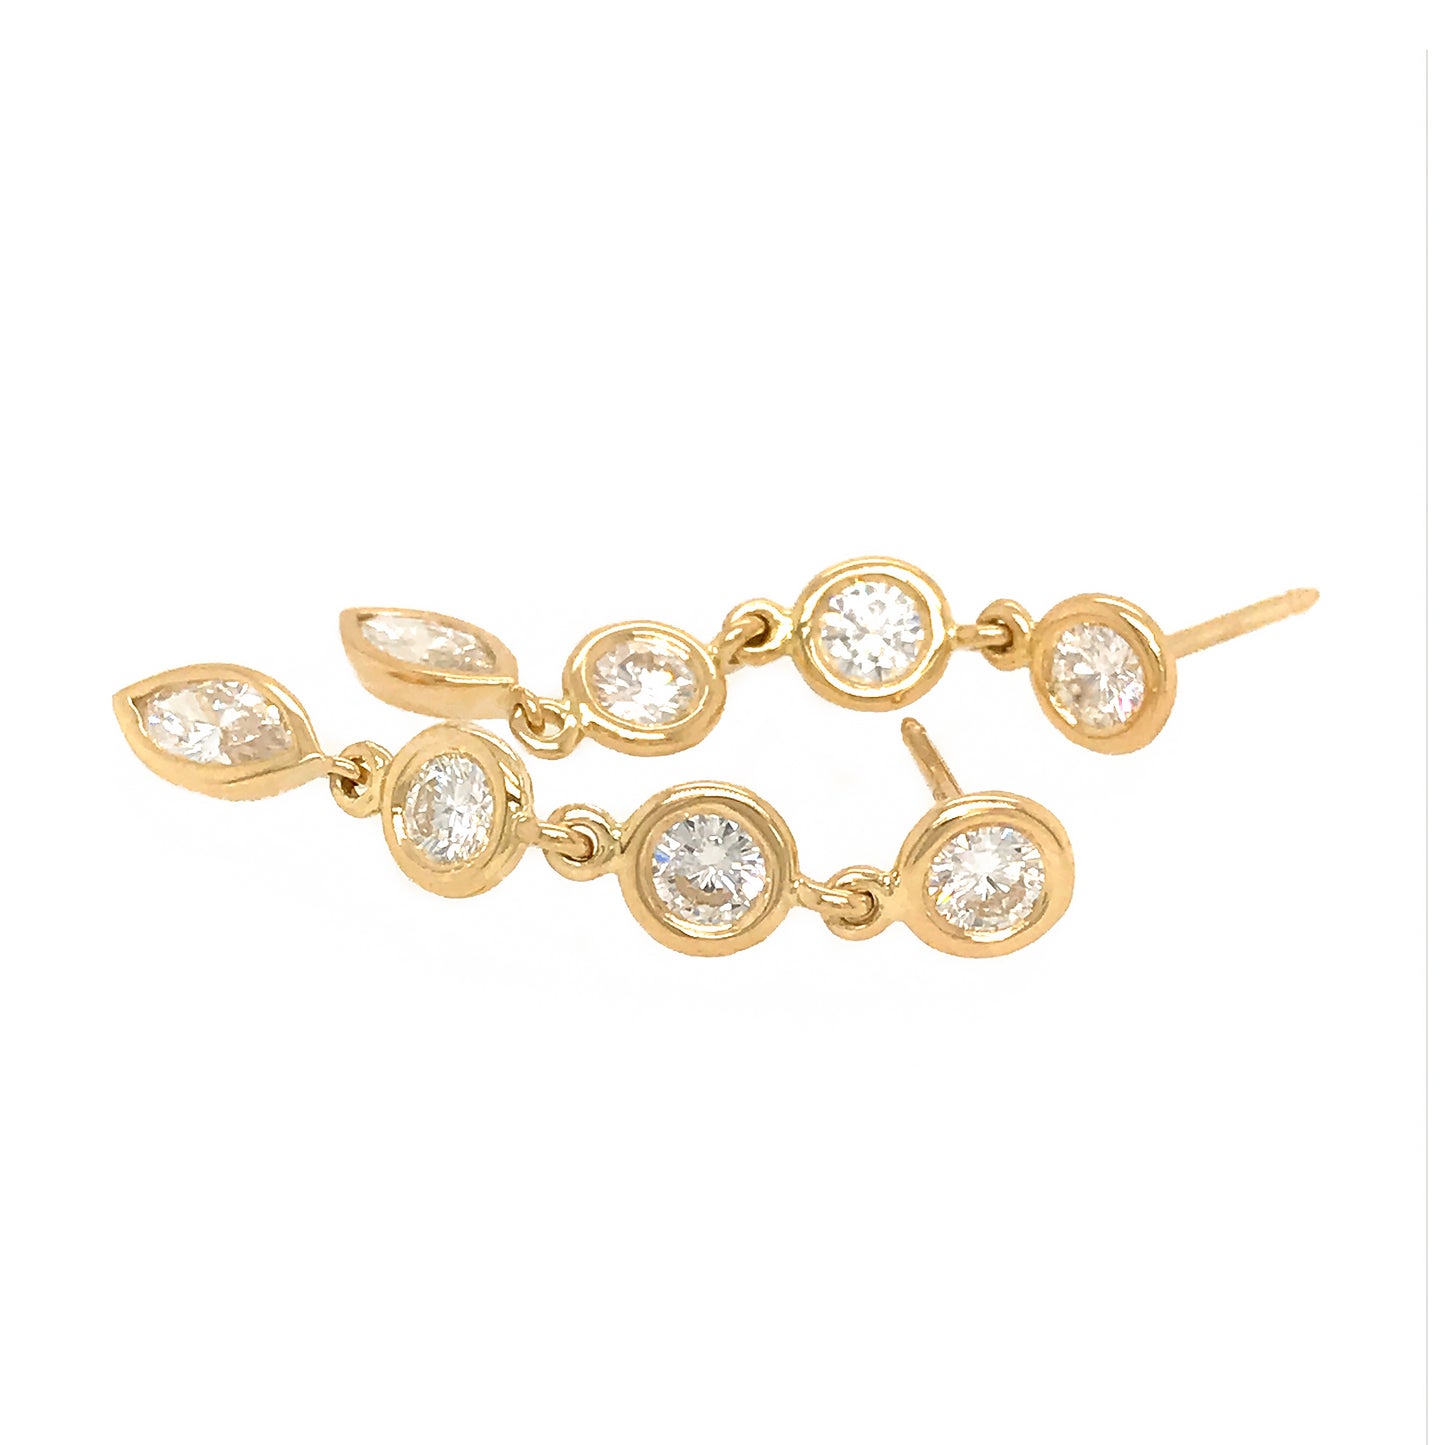 FAB DROPS 18k Yellow Gold Round and Marquise Diamond Drop Earrings